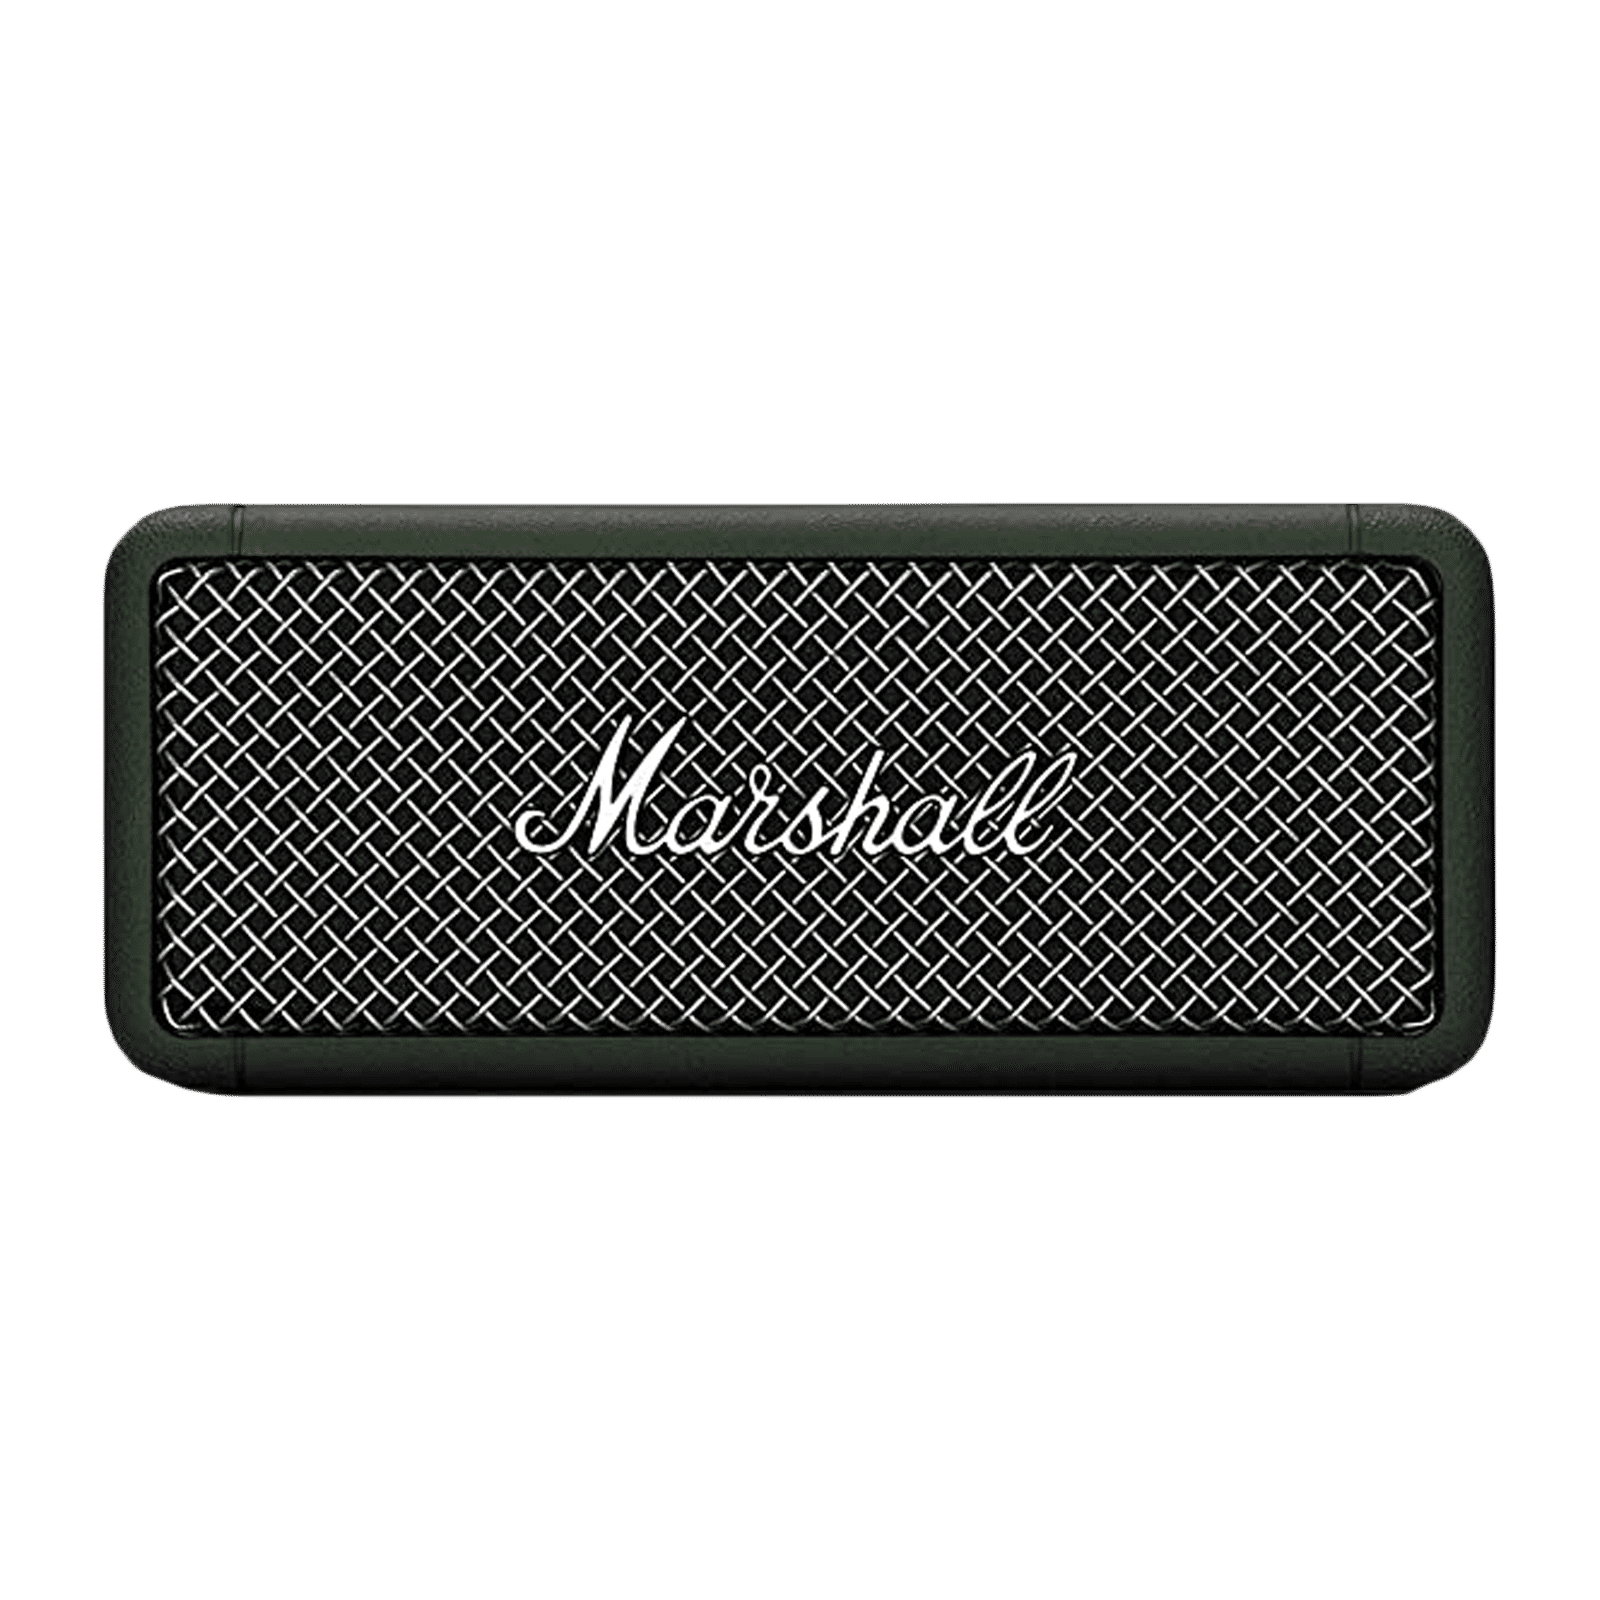 Watts Portable Speaker Buy Emberton Croma 20 Capability, Marshall Online - (Fast Charging MS-EMBRN-FRST, Forest) Bluetooth